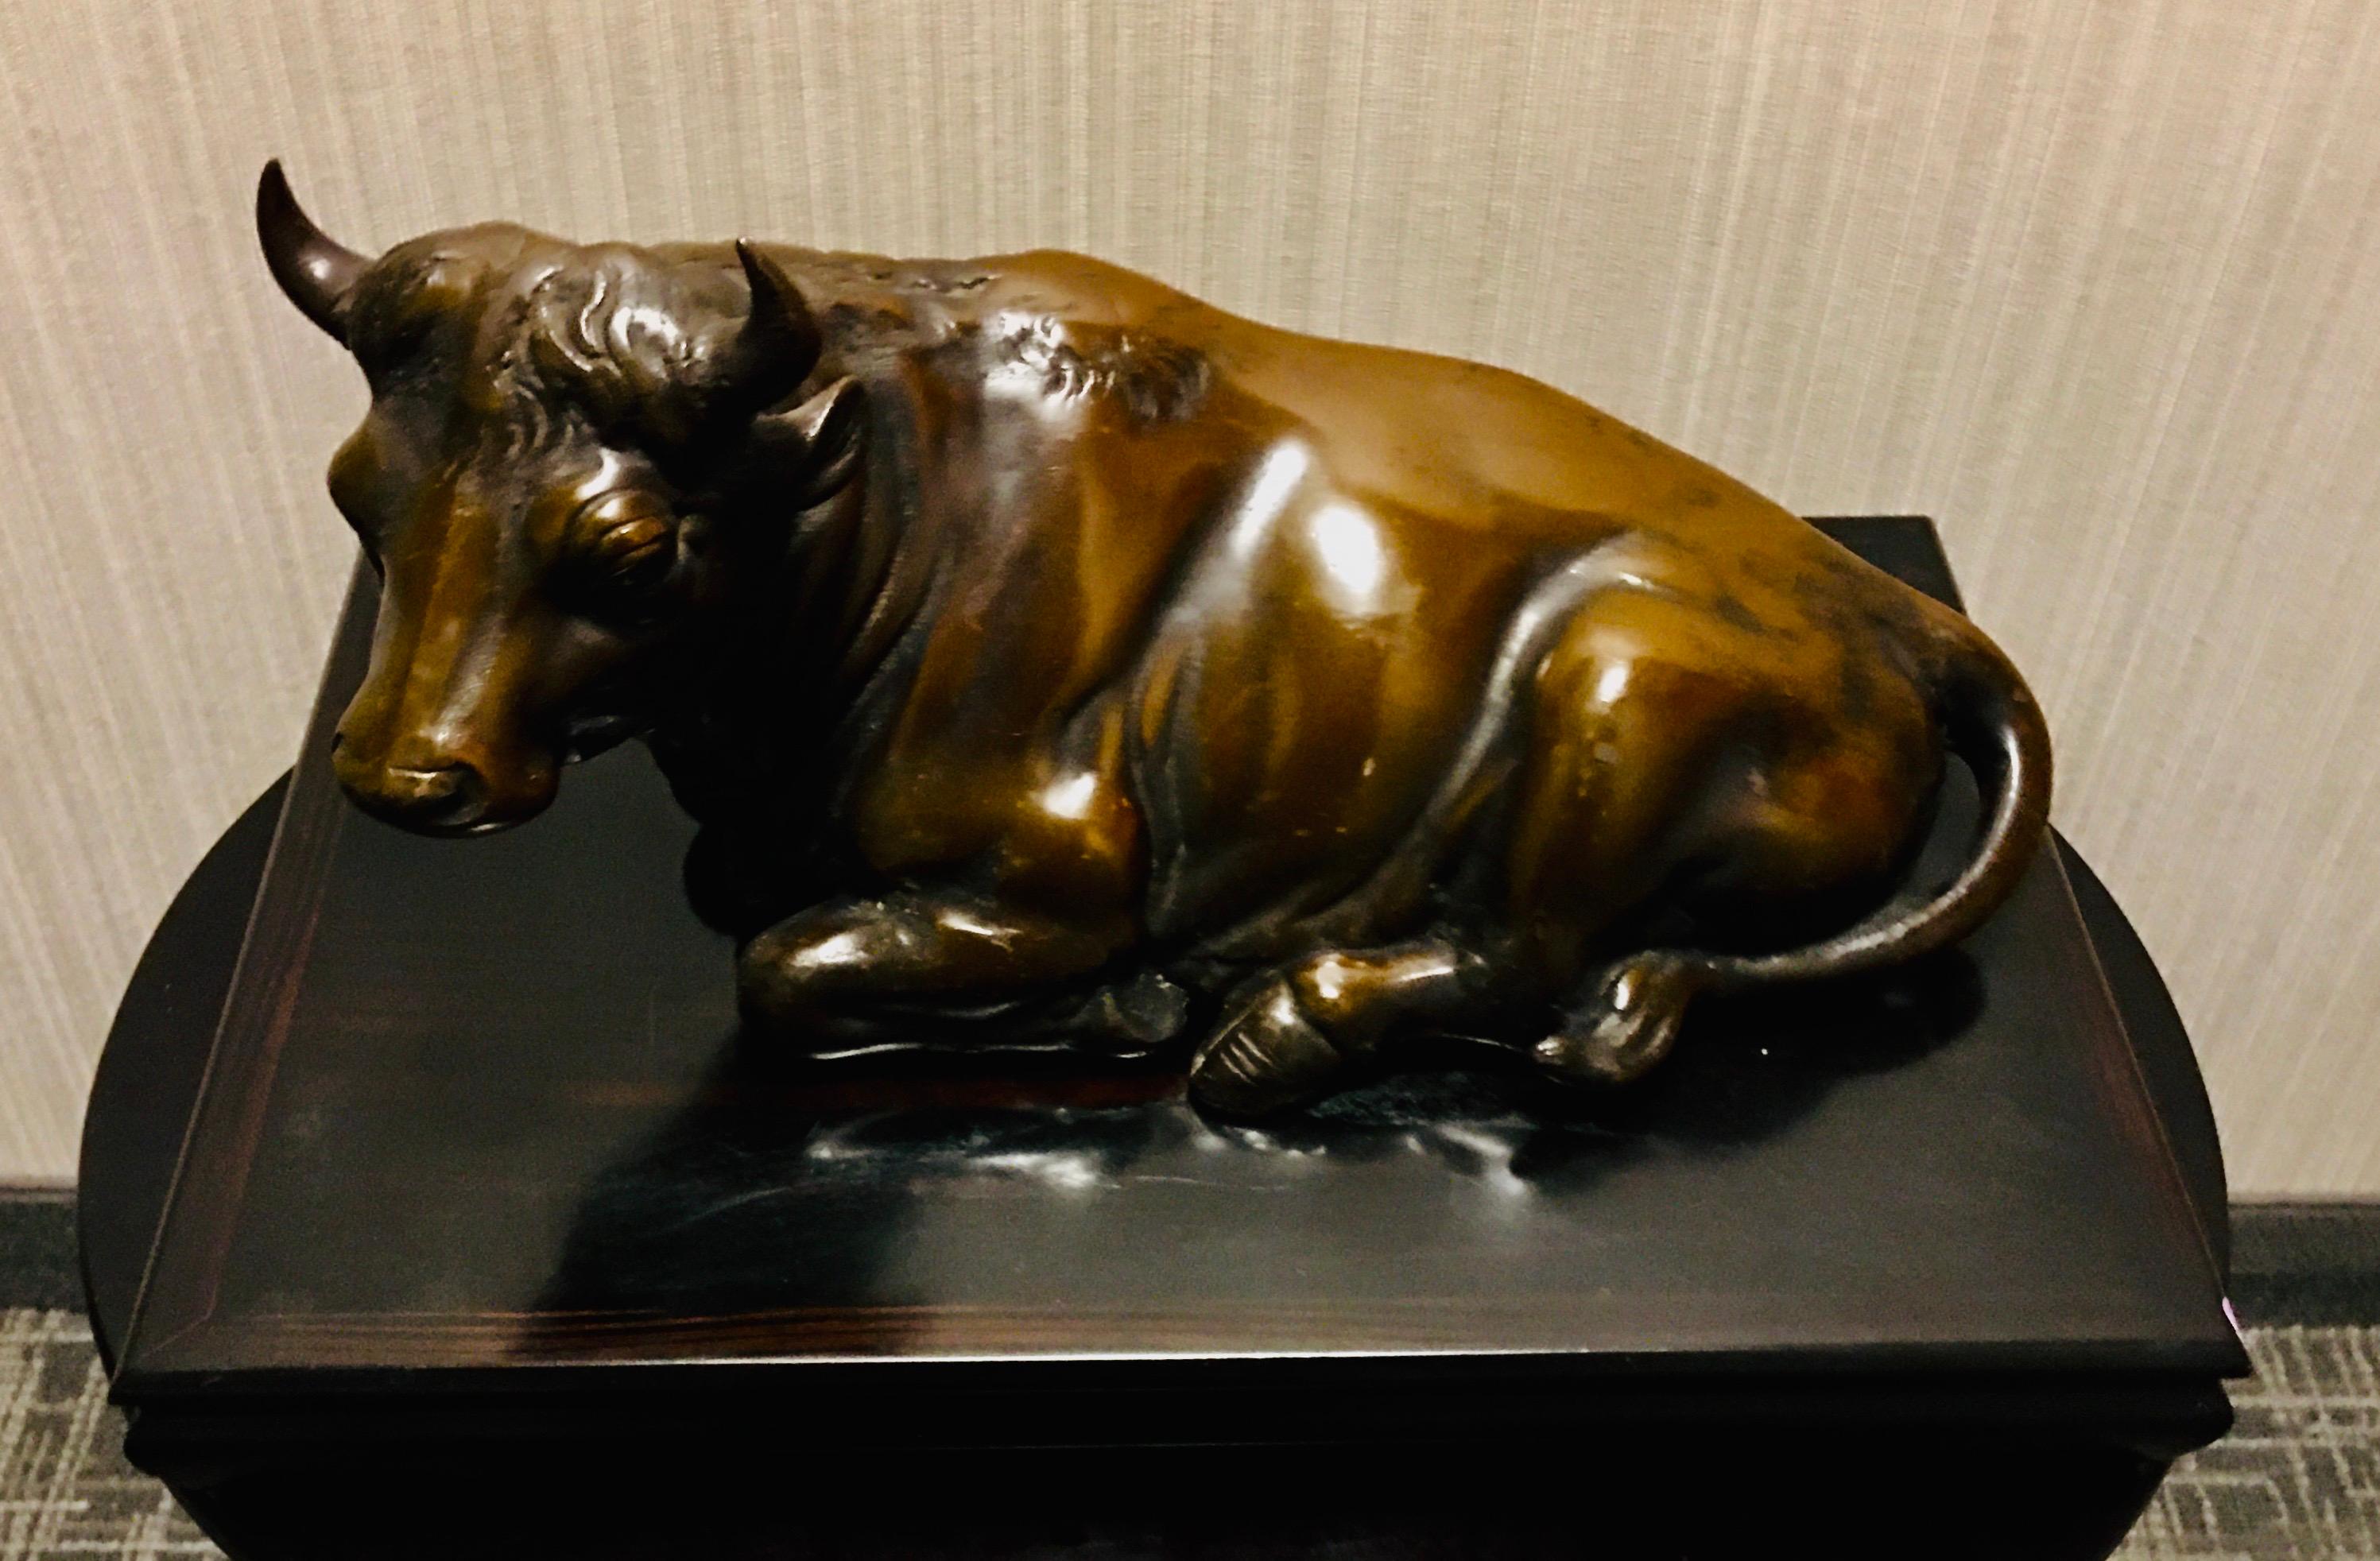 Japanese Meiji period bronze cast resting cow sculpture, placed on a fine lacquered presentation stand. The piece dates from the Meiji period, circa 1880.
In great antique condition with minor aging.

Measures: 17’” L x 8” H x 5 1/2 W
Lacquered